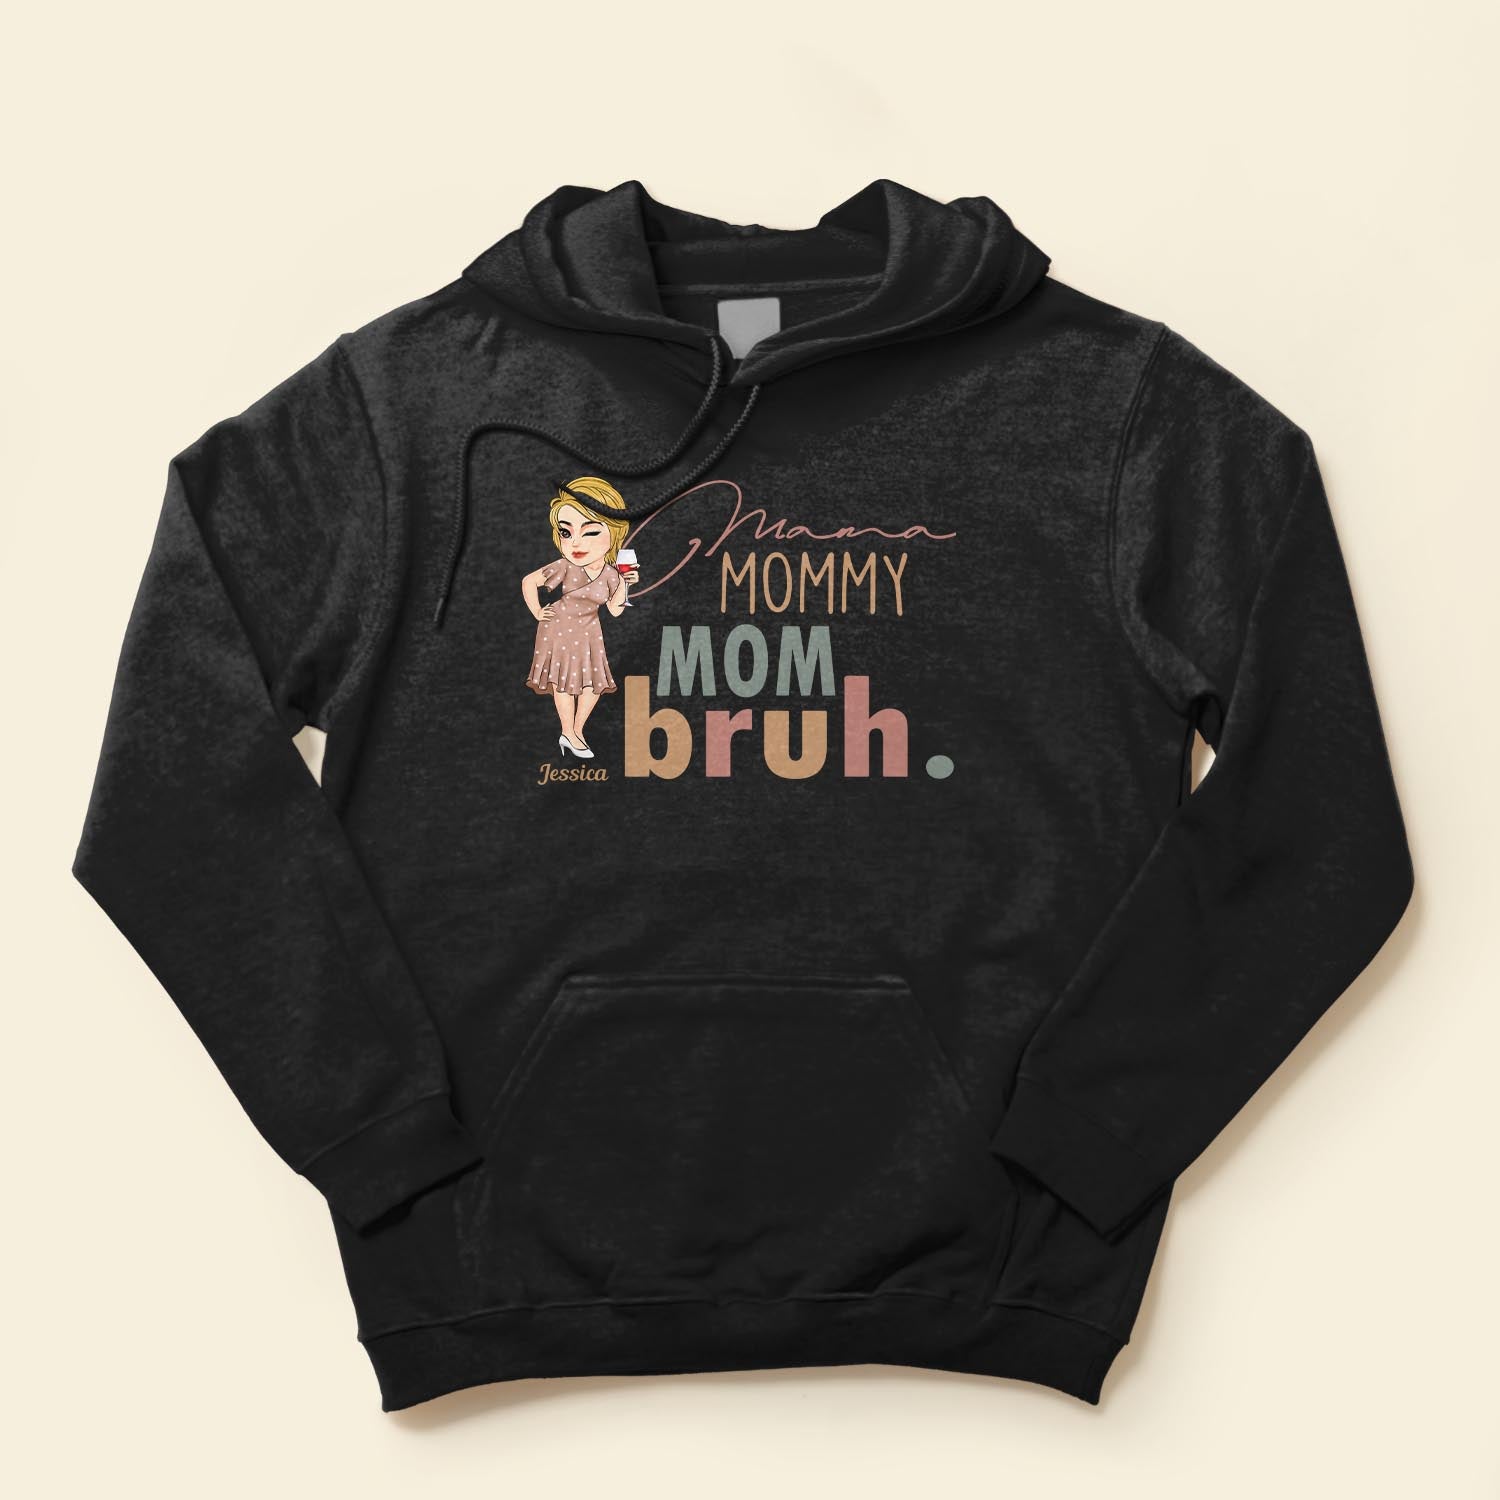 Mama Mommy Mom Bruh - Personalized Shirt - Birthday, Funny, Mother's Day Gift For Mom, Mother, Wife, Grandma, Nana